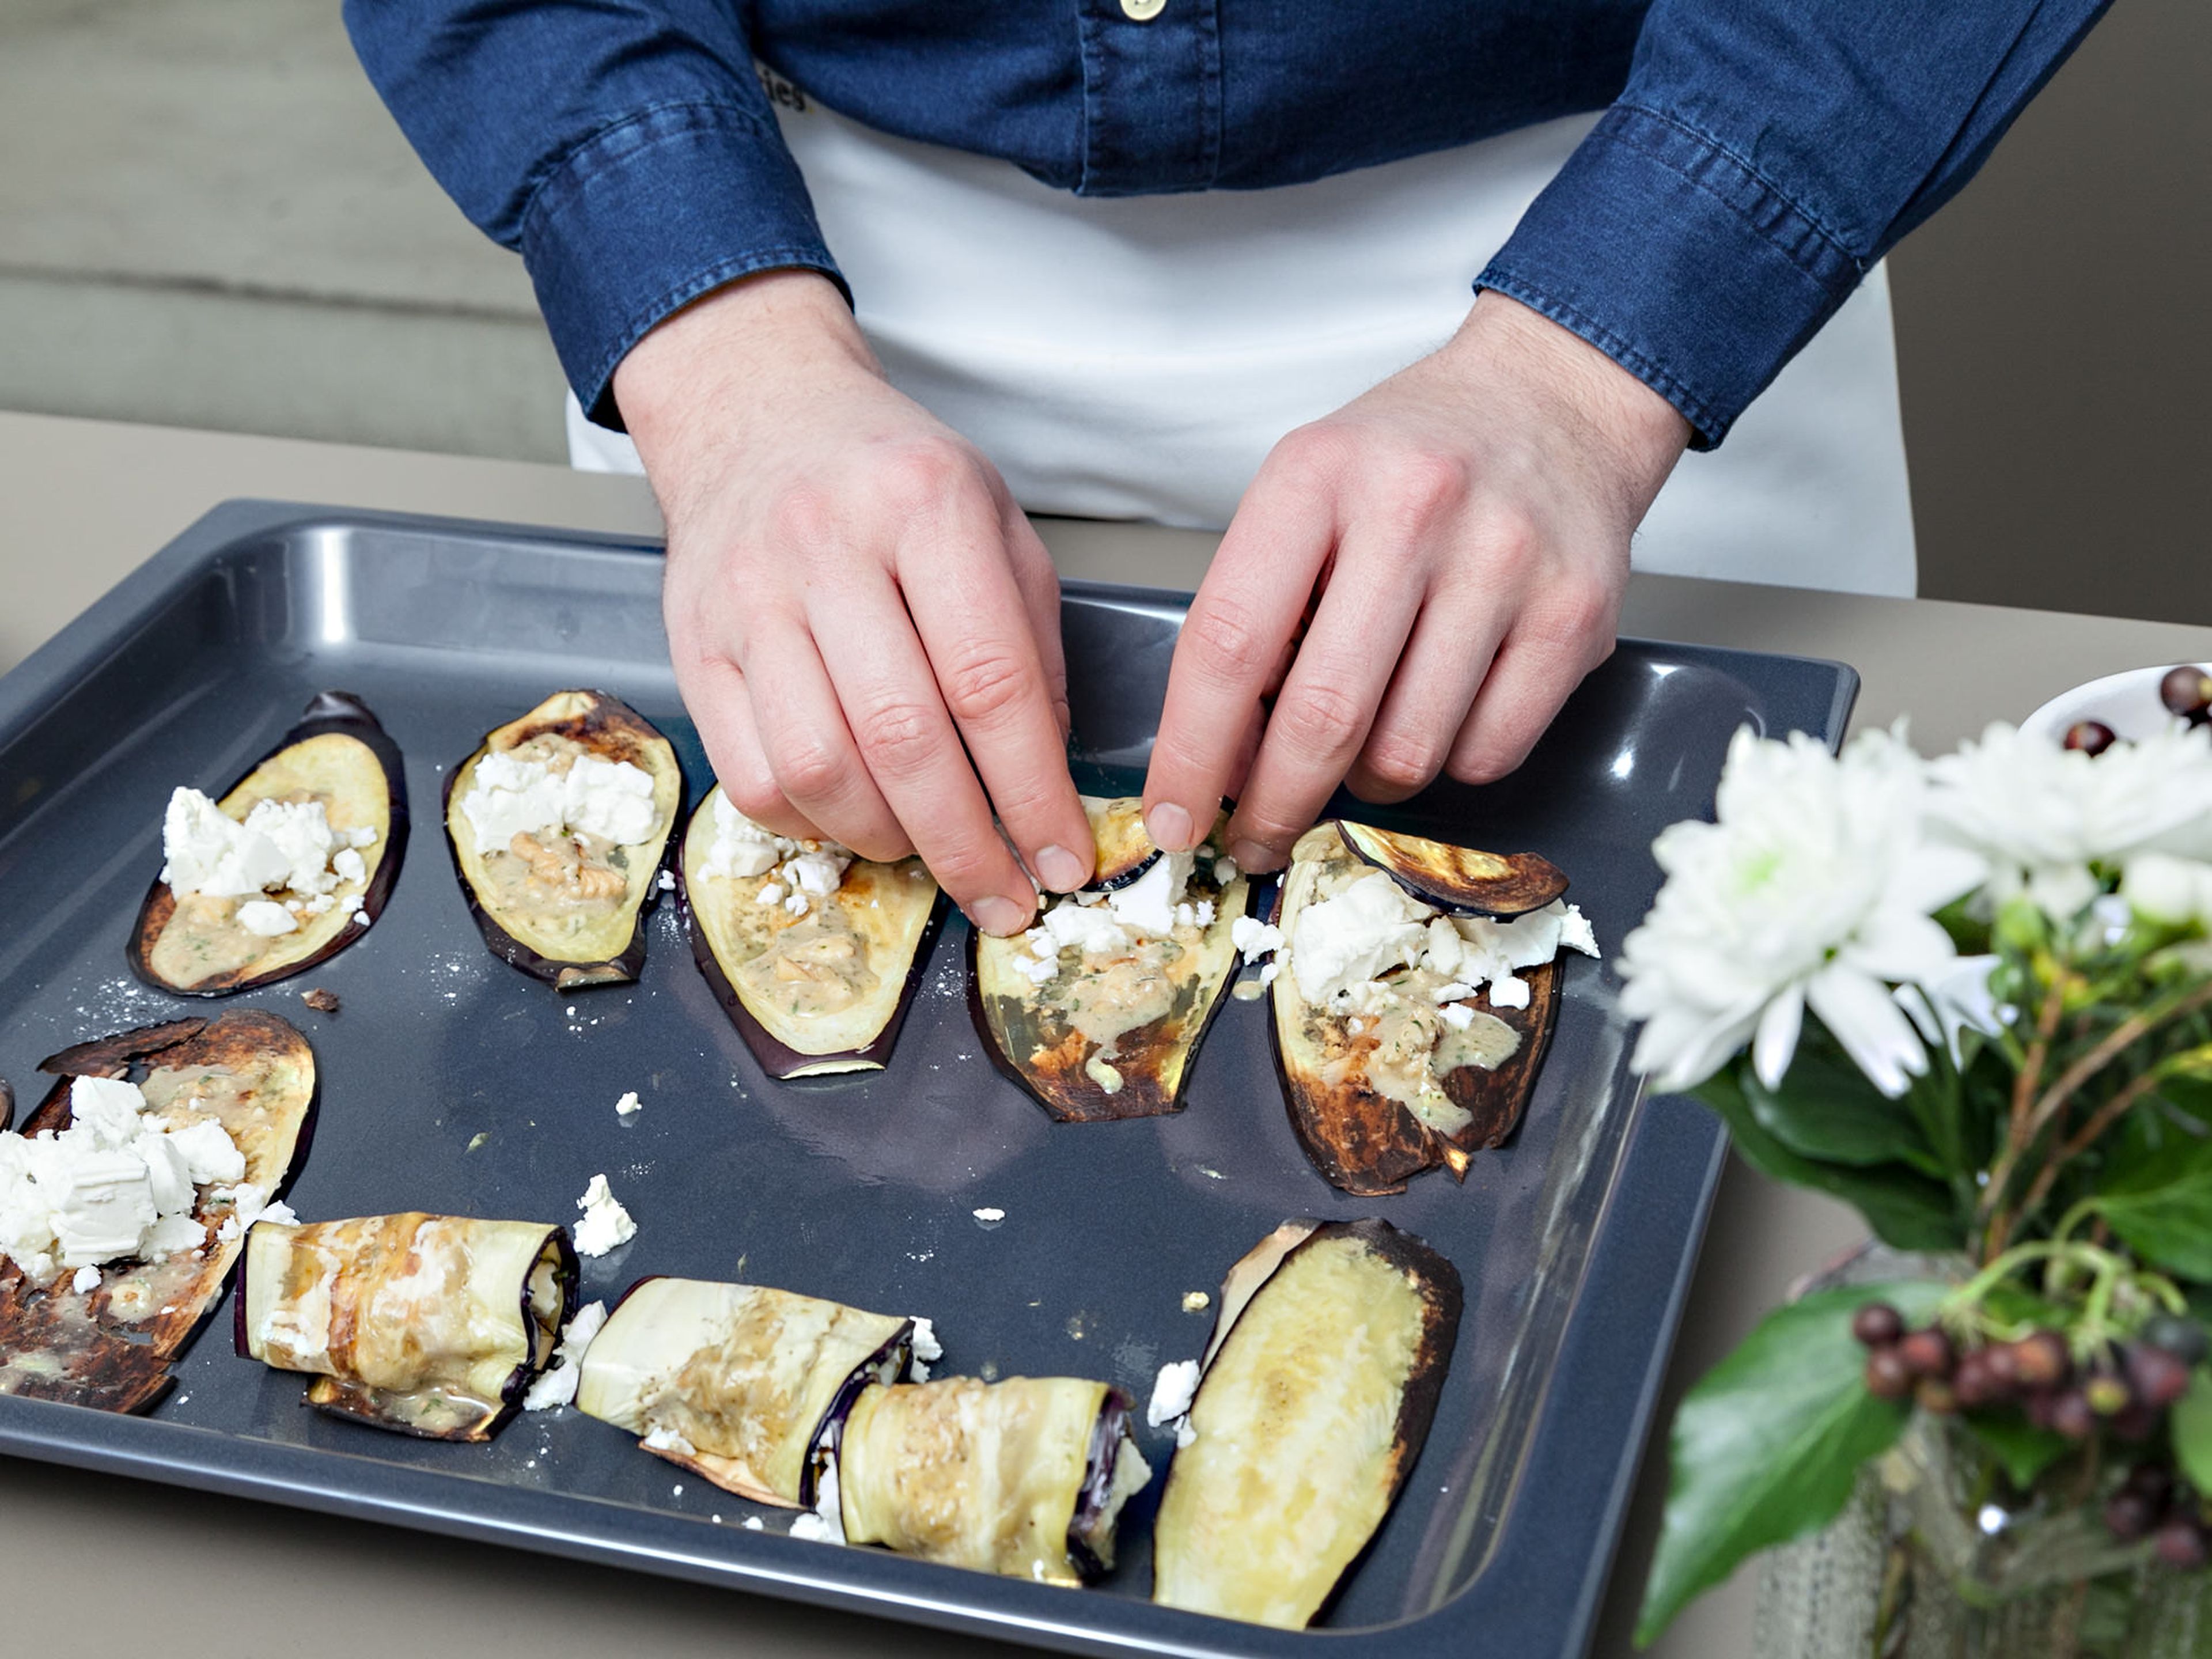 Coat cooked eggplant slices with walnut-thyme paste and place a small spoonful of goat cheese in the center of each slice. Roll up the slices.